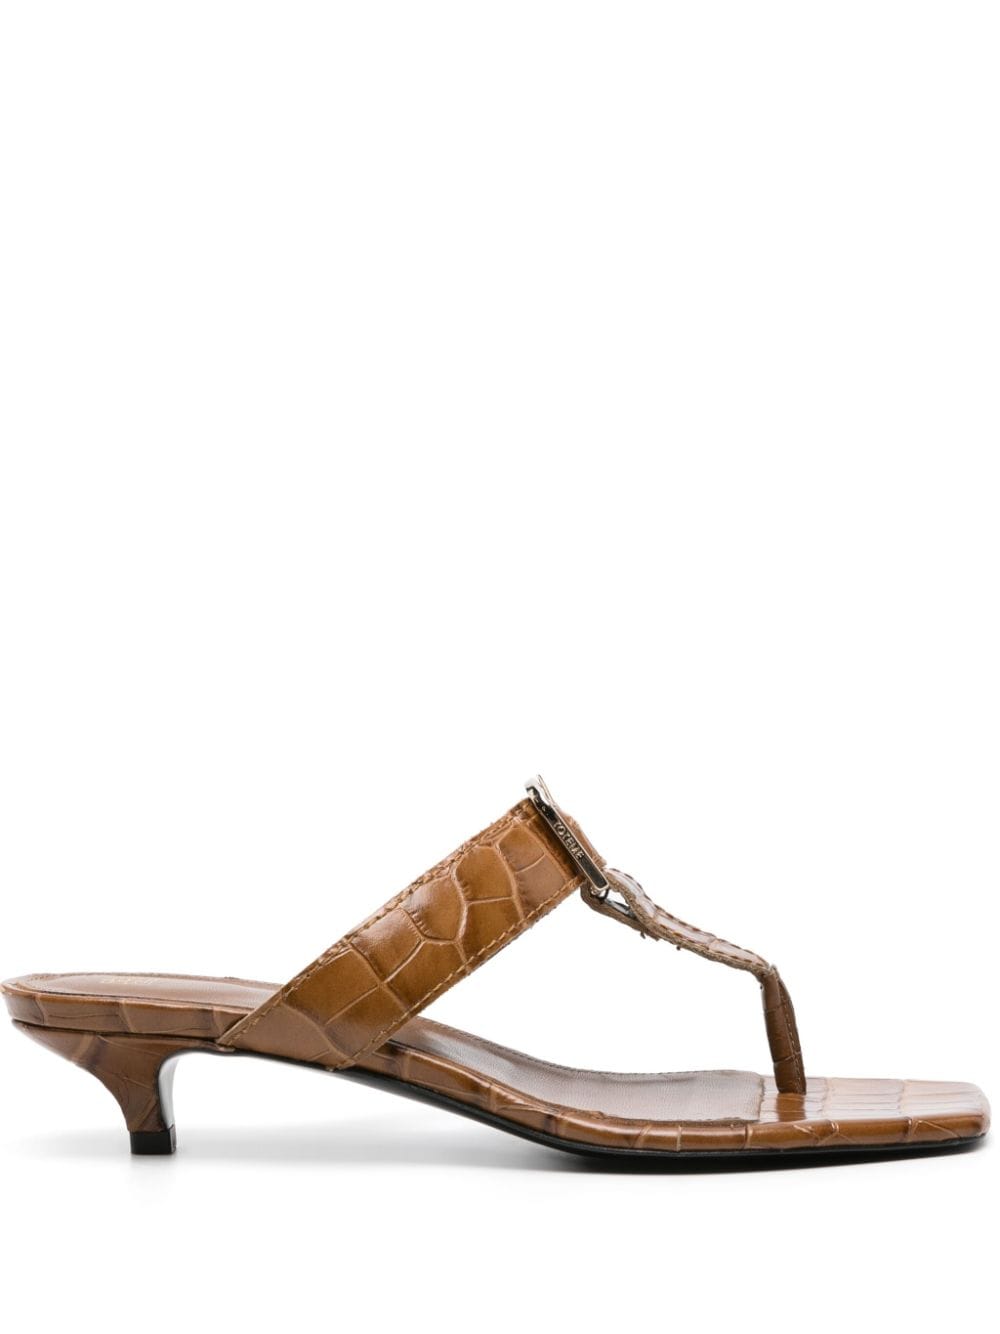 TOTEME The Belted 35mm crocodile-effect mules - Neutrals von TOTEME